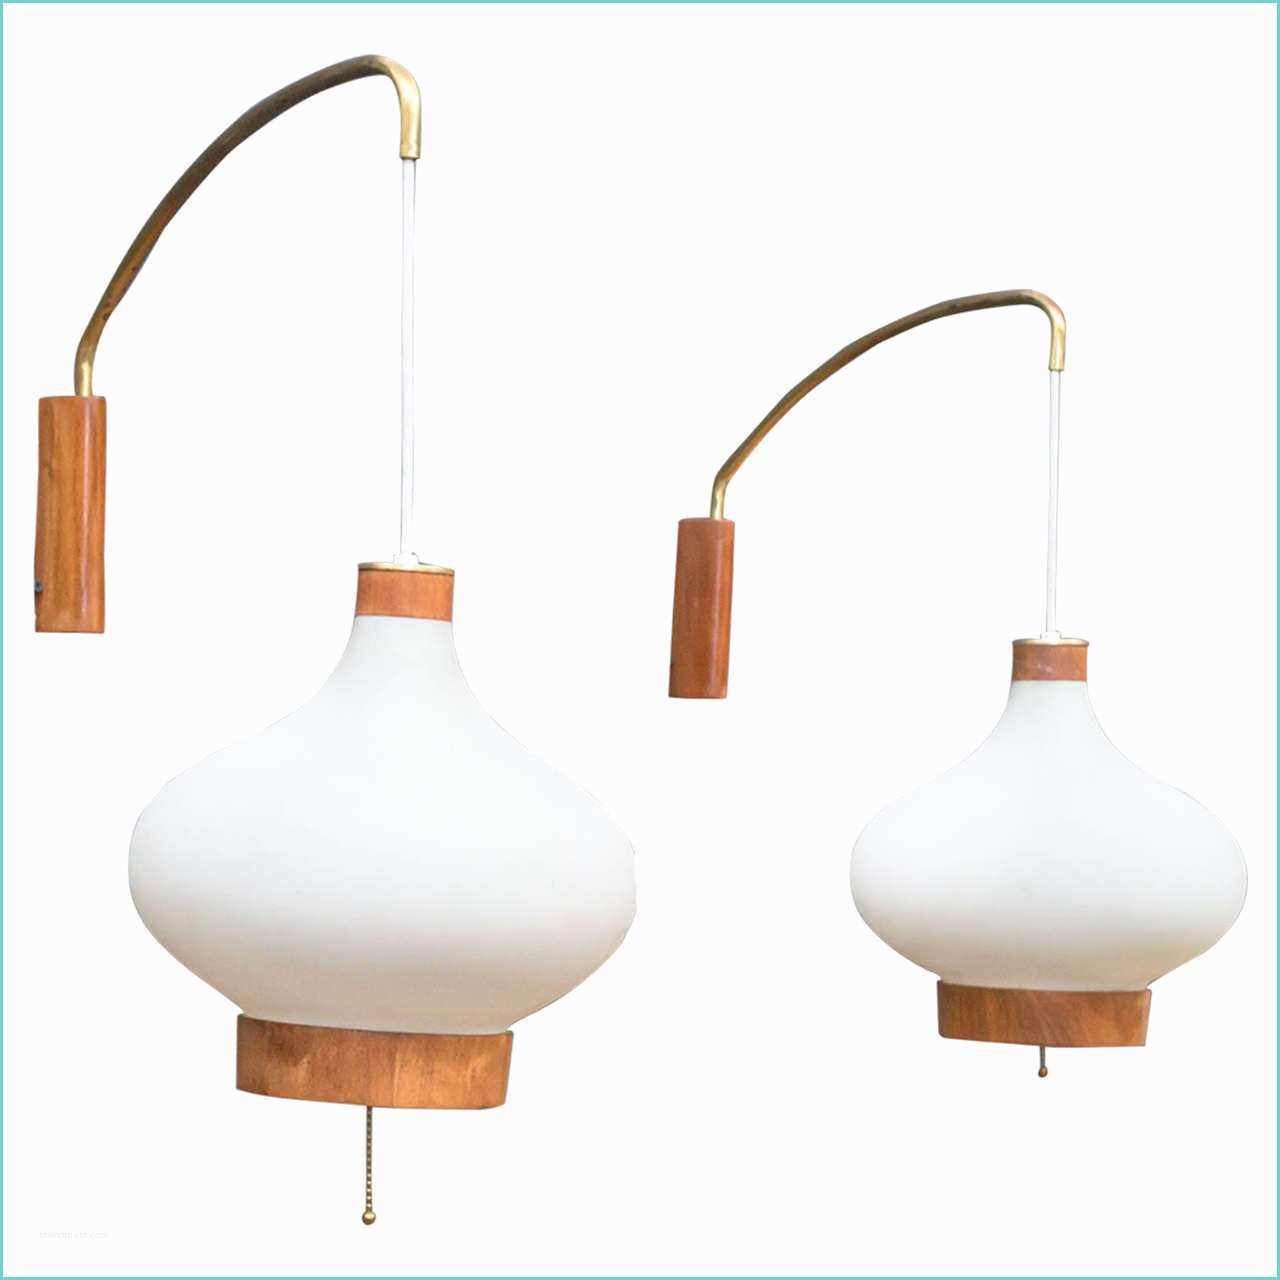 Midcentury Wall Sconce Mid Century Modern Wall Sconces for Sale at 1stdibs